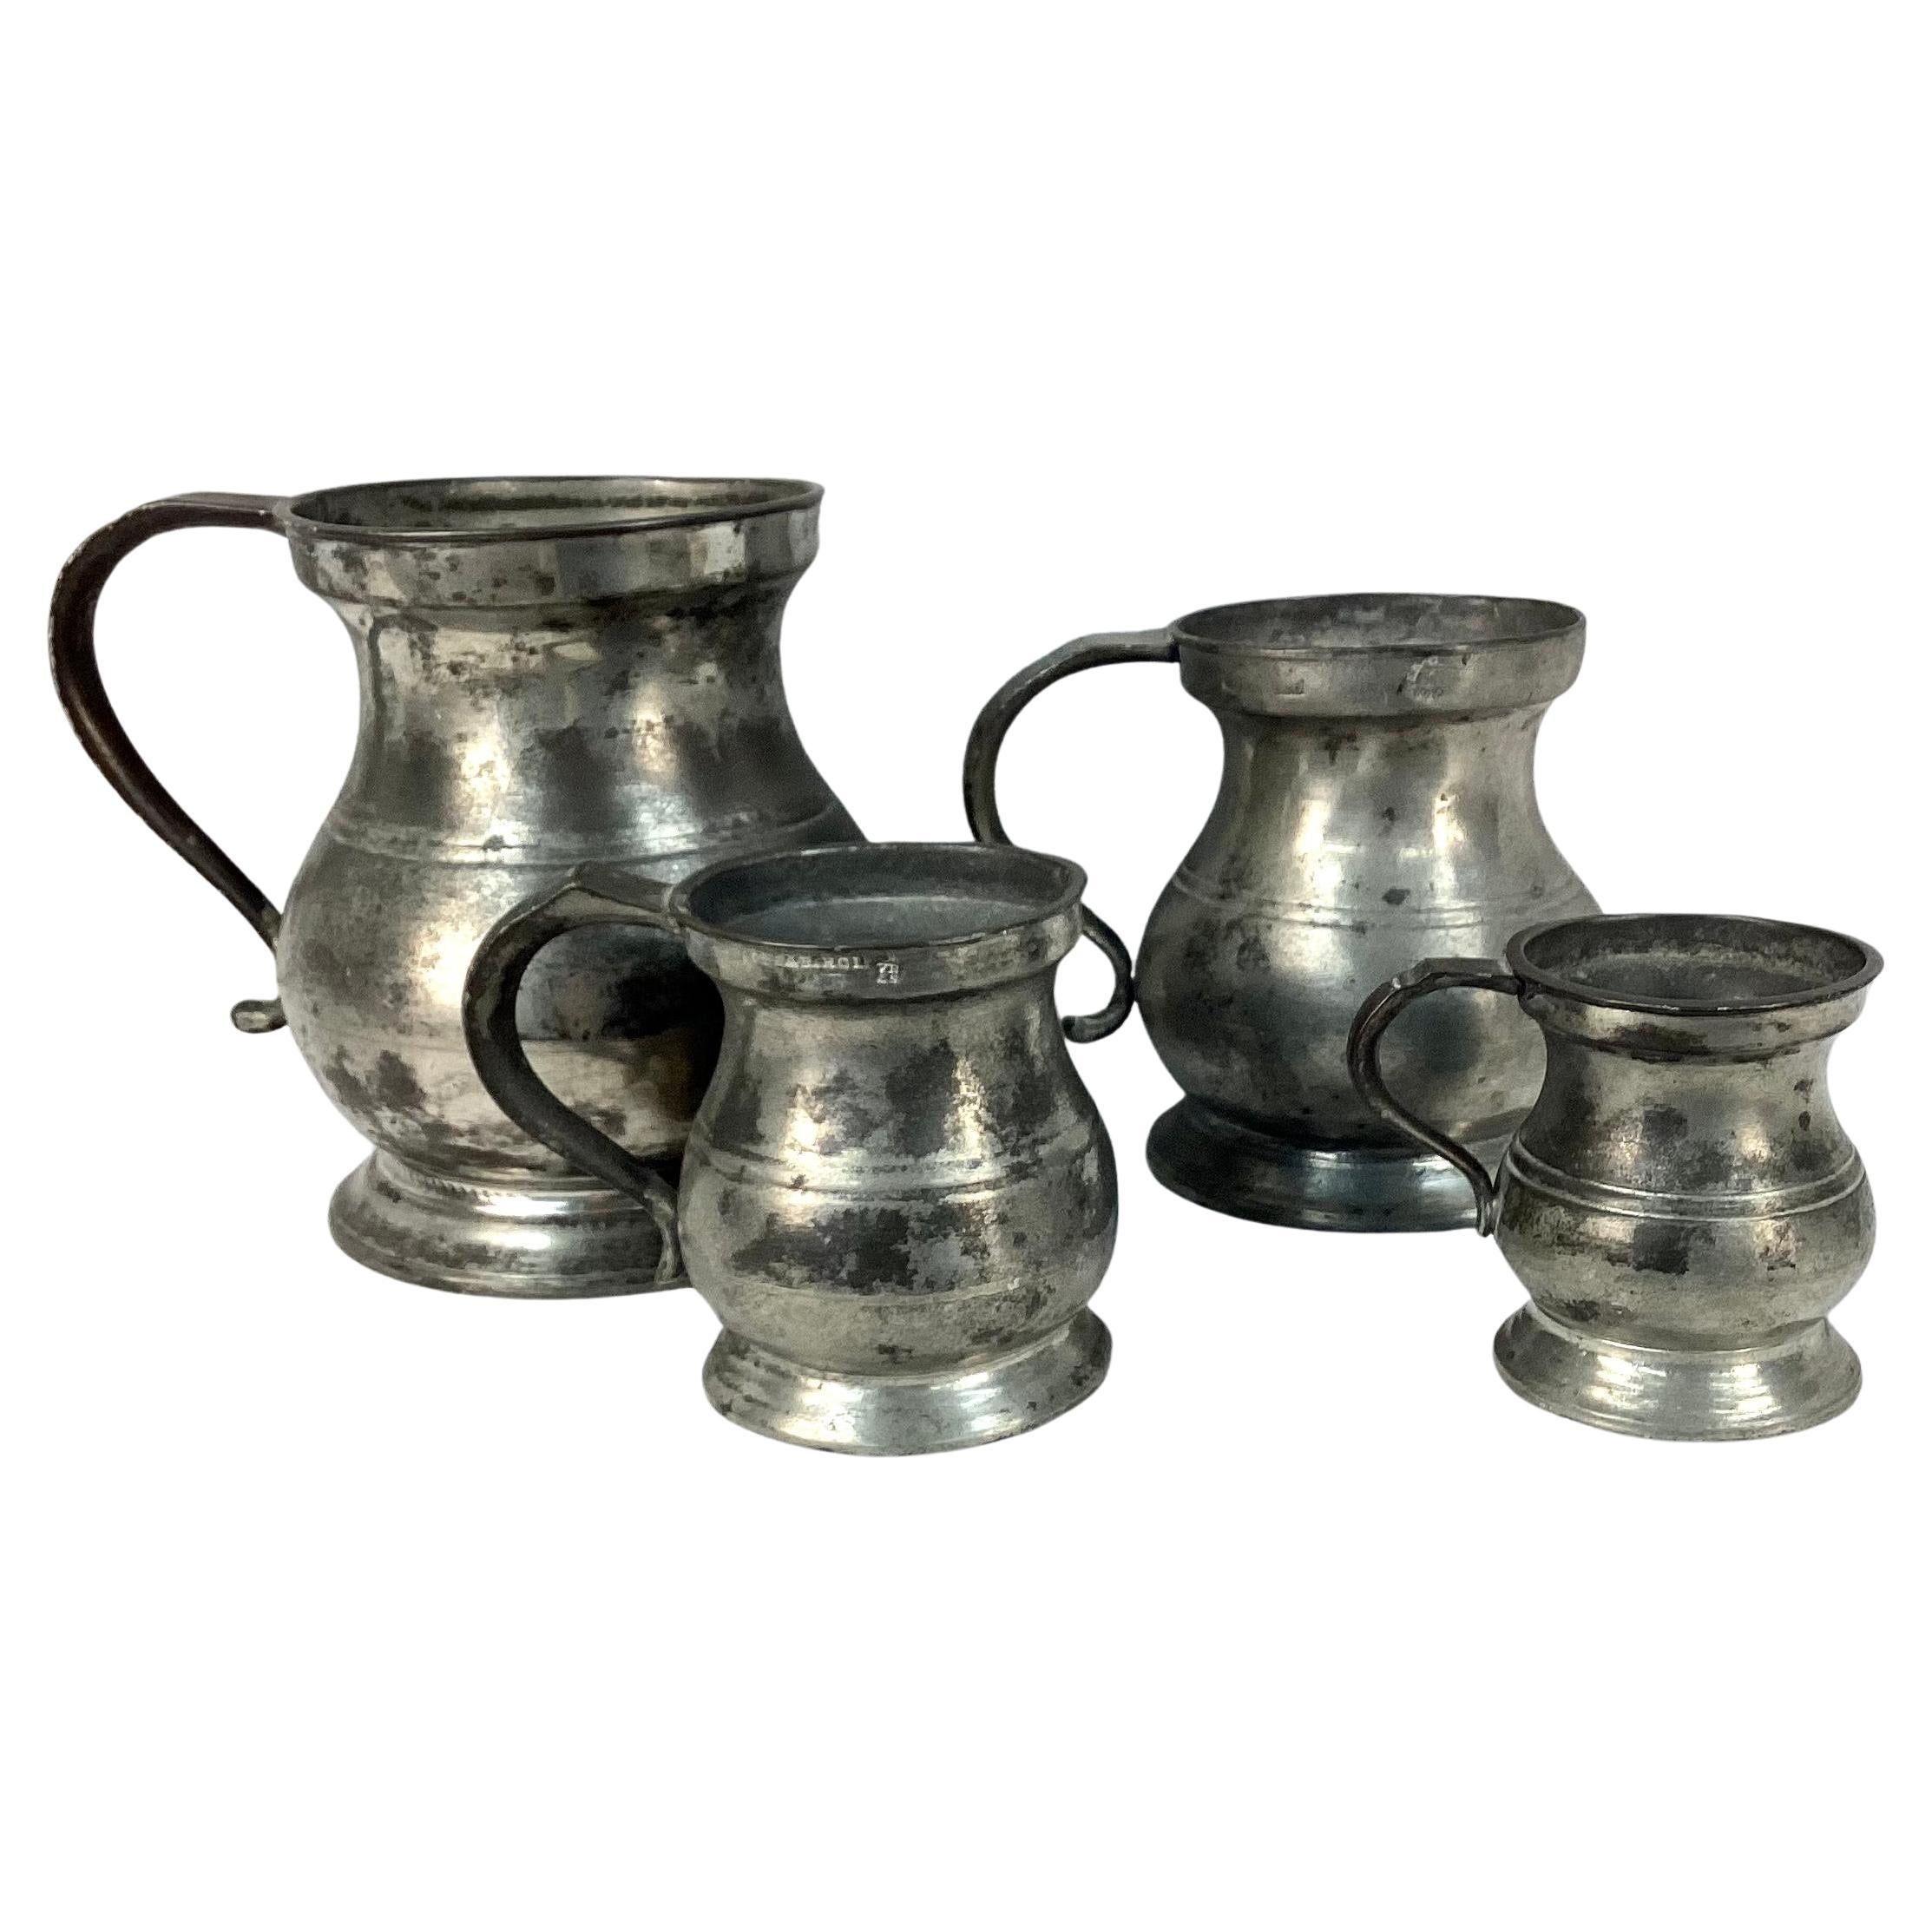 Set off four 19th century Yates & Birch pewter pitchers with pewter handles. Two are clearly stamped with Yates & Birch marking, also have Queen Victoria certification marks. Etched on all four undersides is name 'Colodny'.  Wonderful old patina. 